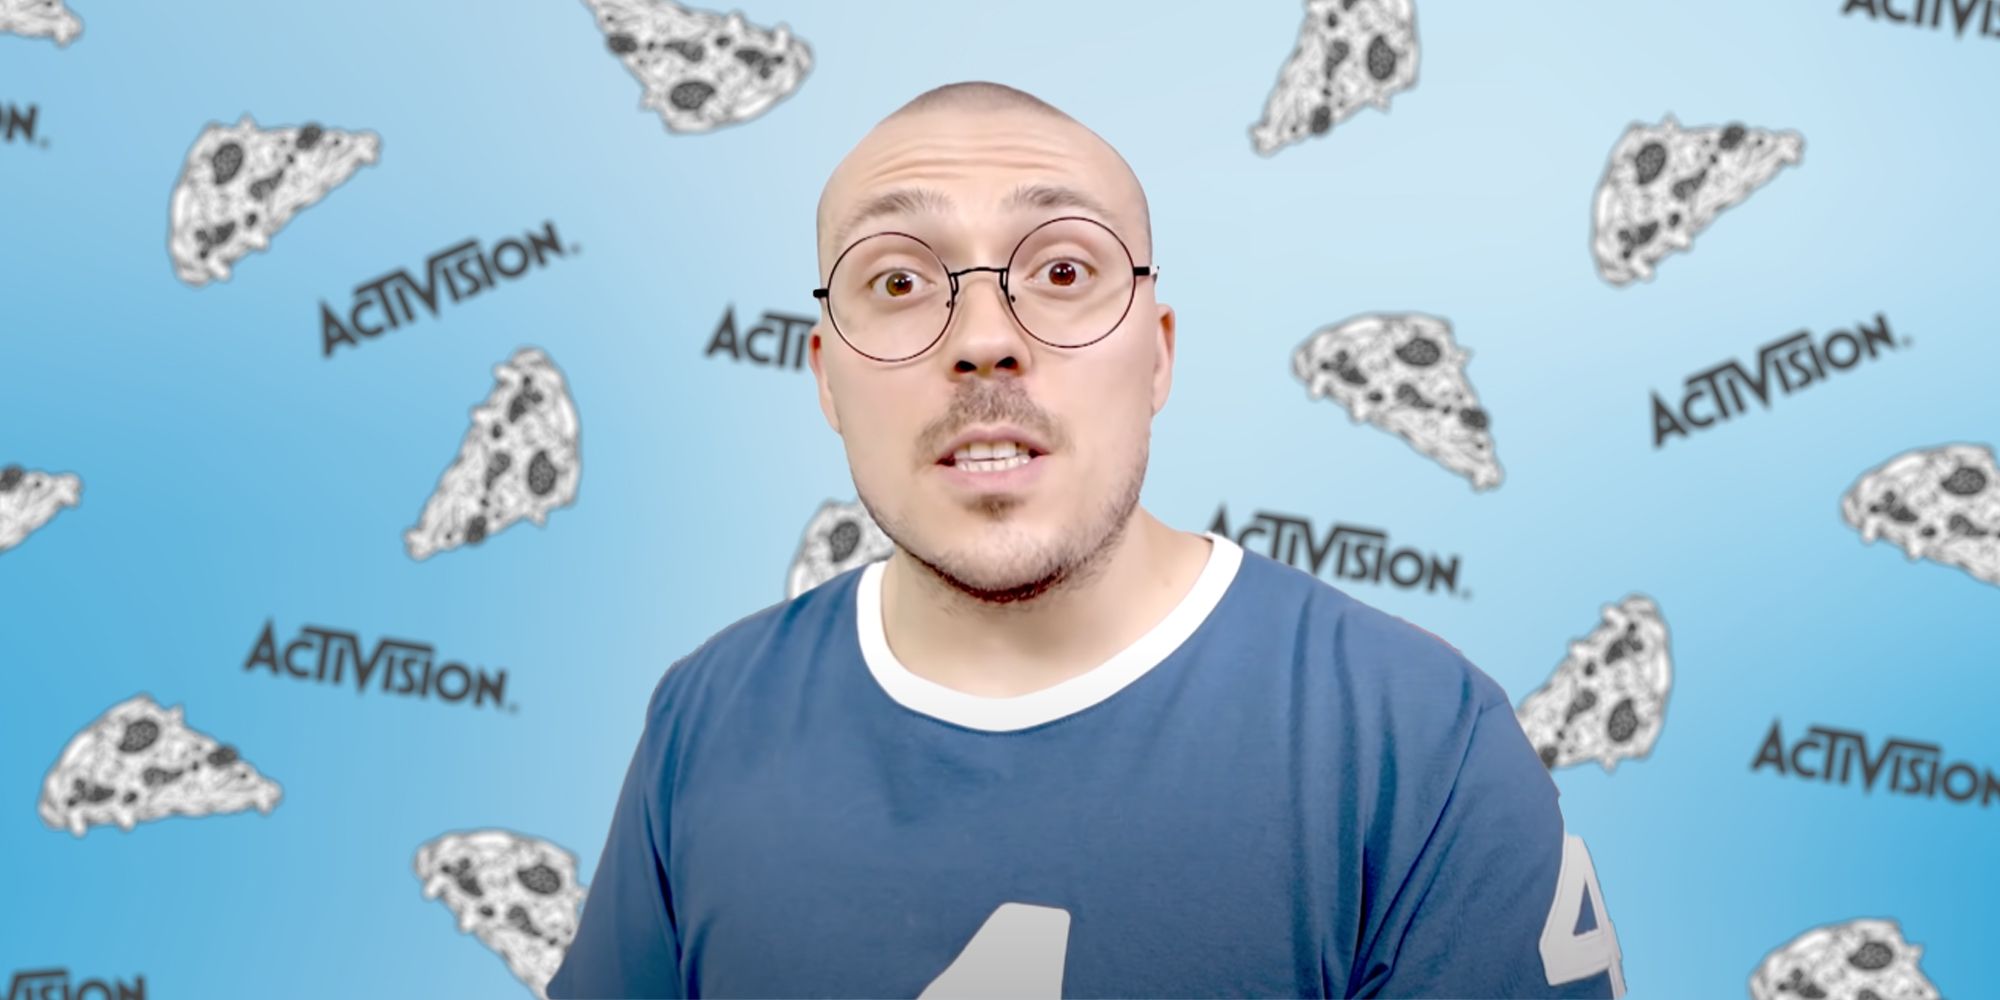 Anthony Fantano in front of a blue gradient with art of pizza and several Activision logos